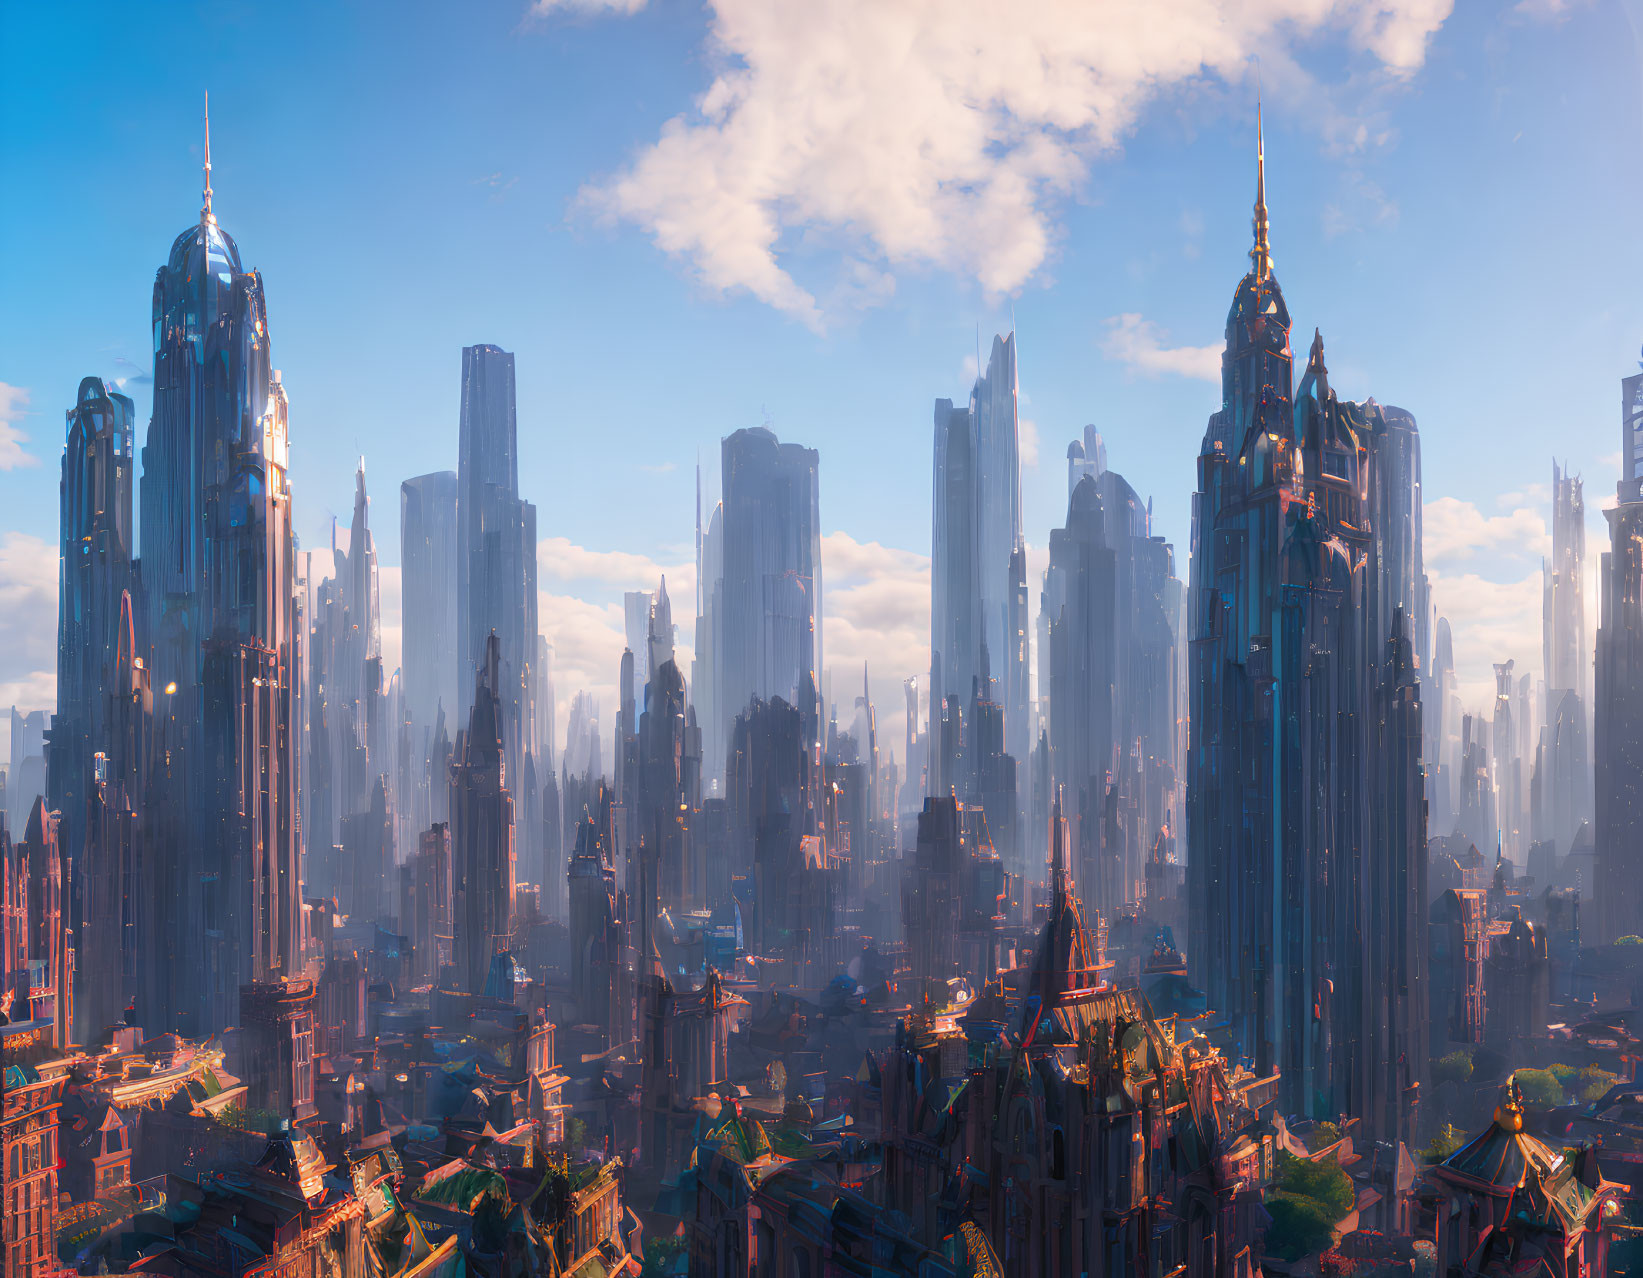 Futuristic cityscape with towering skyscrapers and neo-gothic architecture